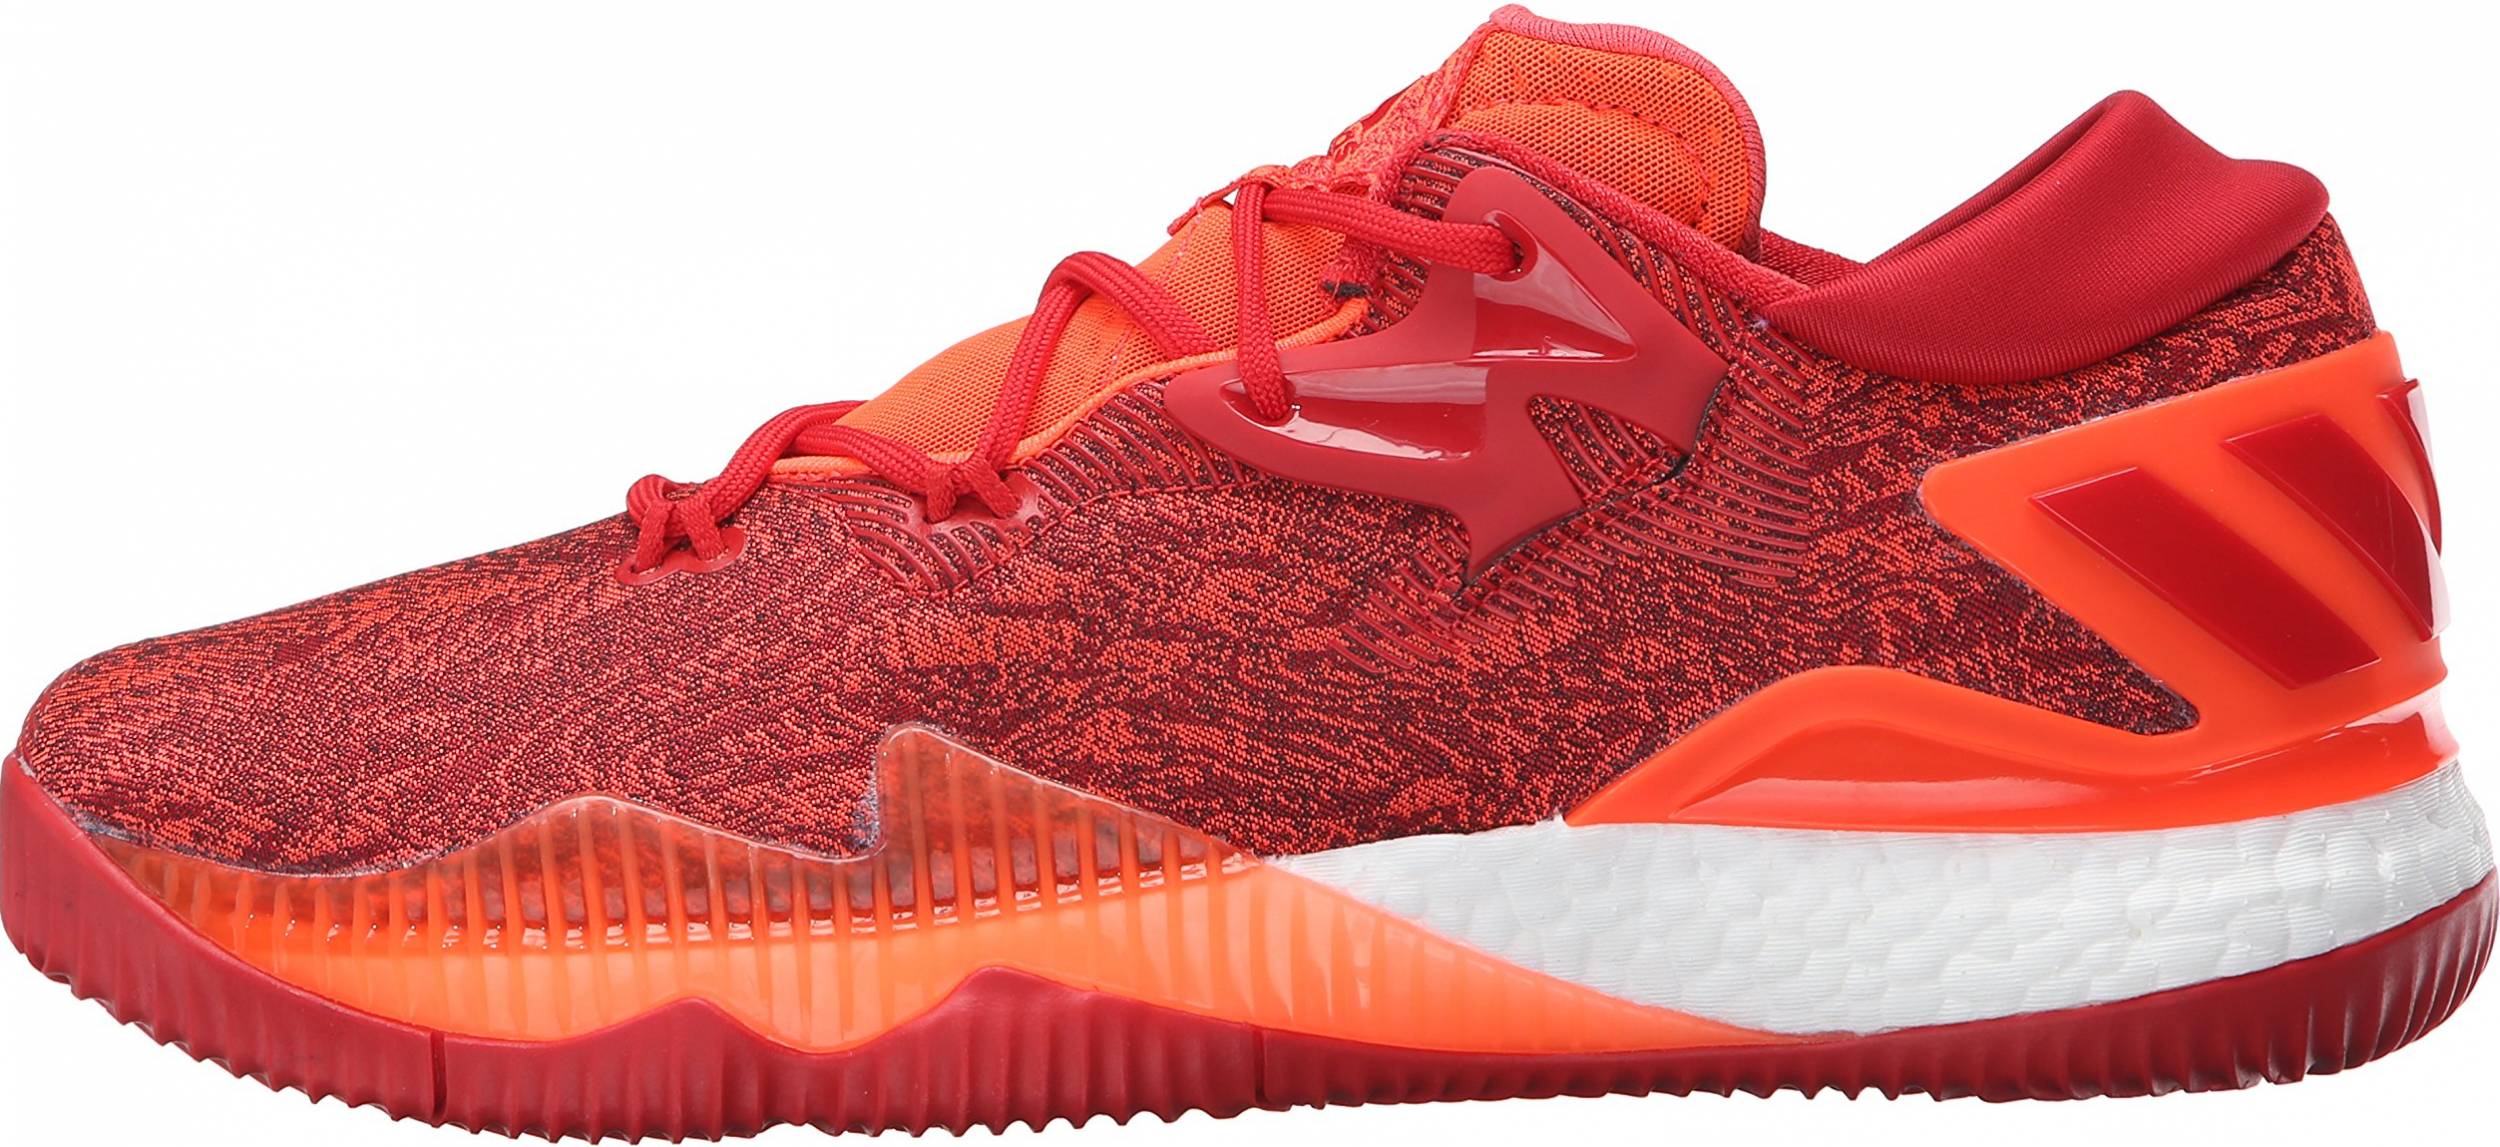 17 Reasons to/NOT to Buy Adidas CrazyLight Boost 2016 (Oct 2021 ...